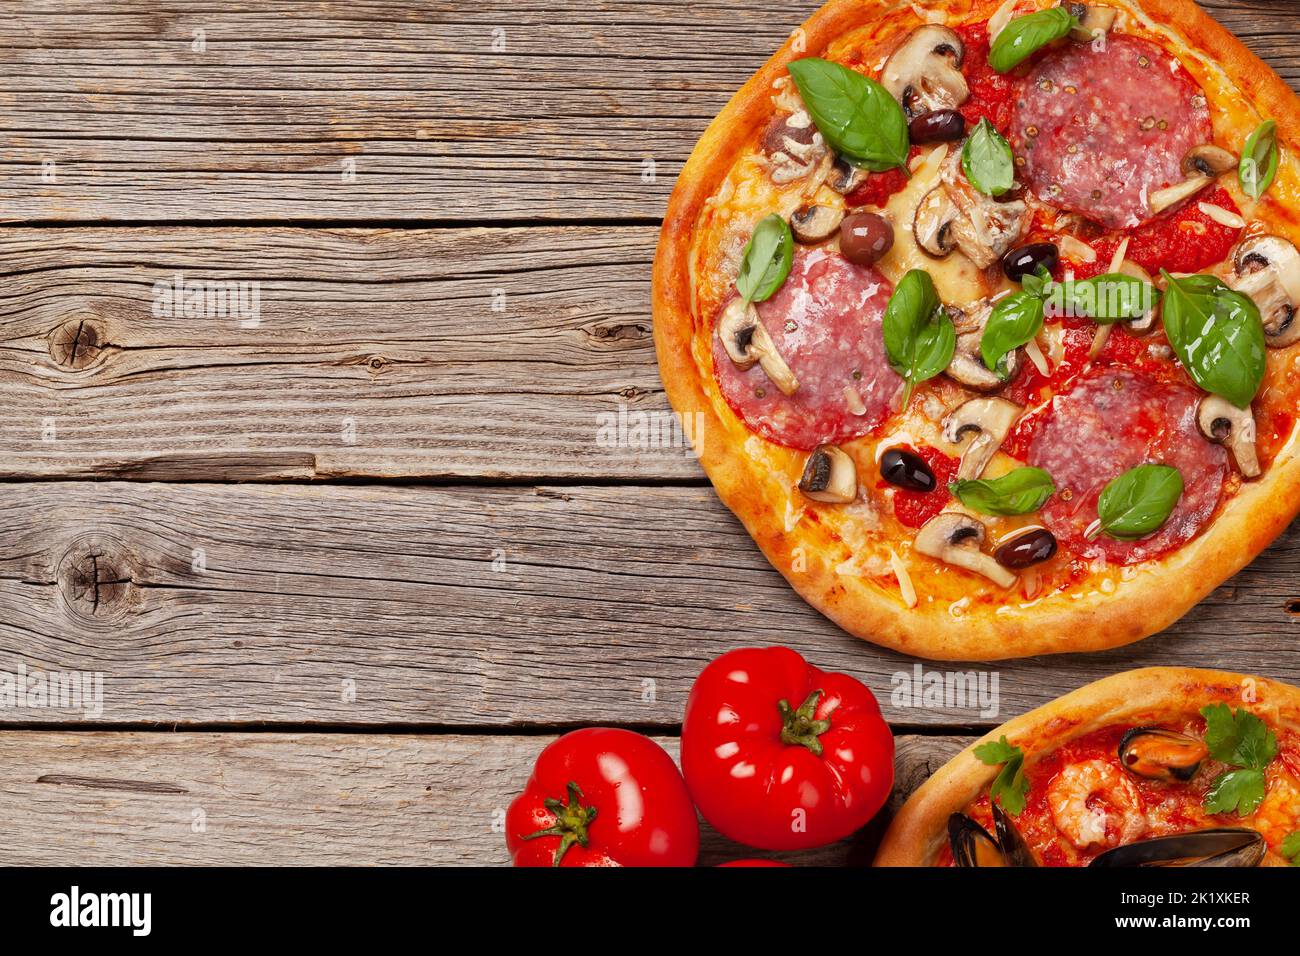 Italian cuisine. Pepperoni and seafood pizza. Flat lay on wooden table with copy space Stock Photo